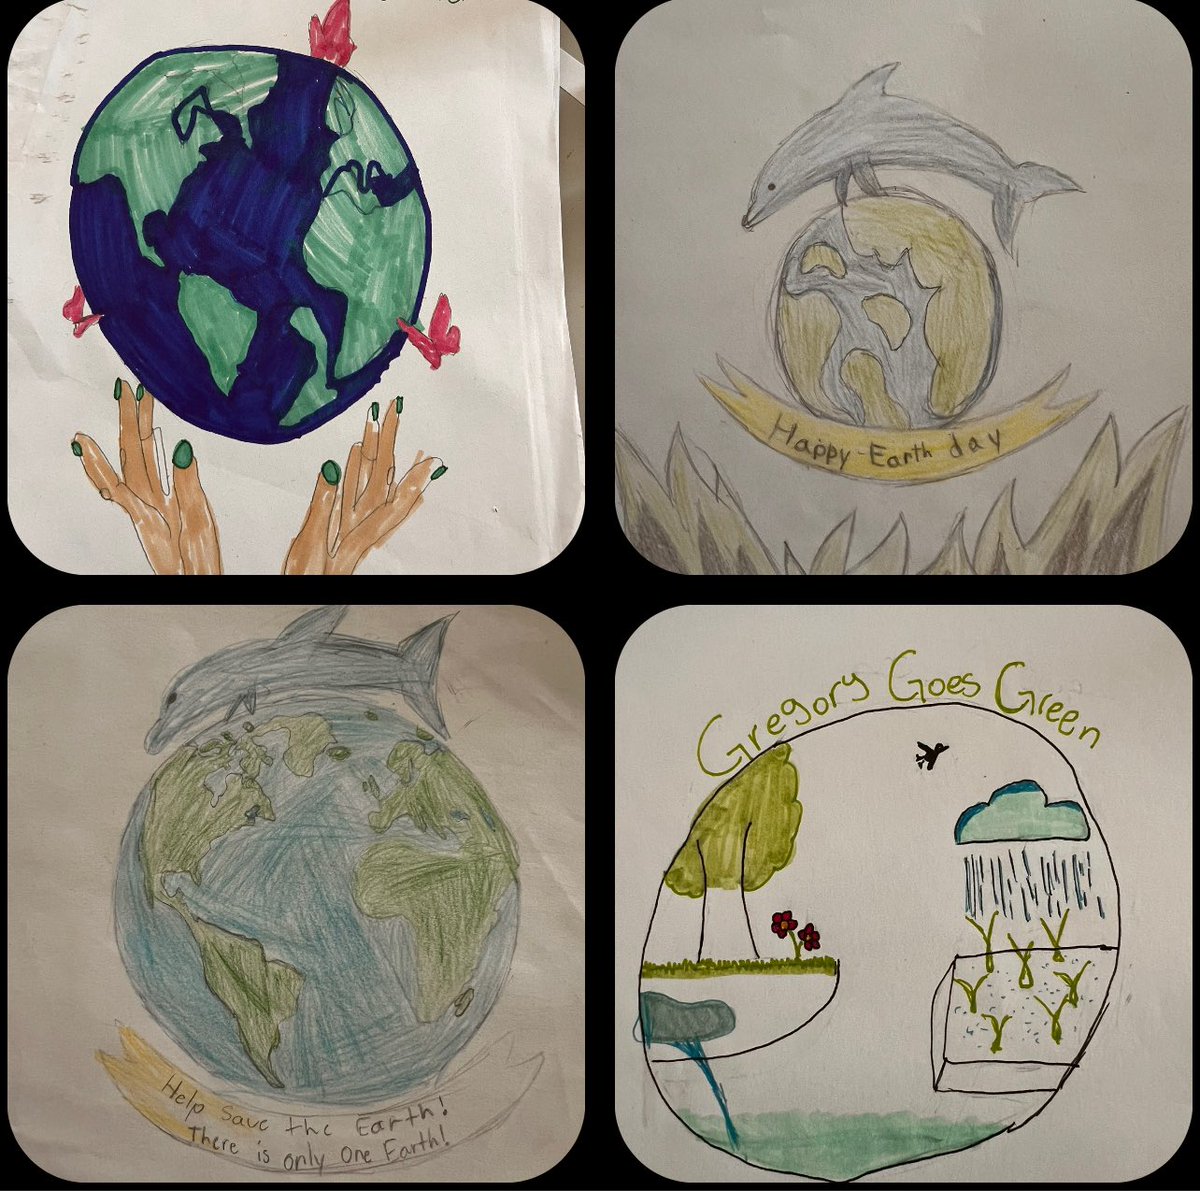 Gregory @gregory_elem is gearing up for an #EarthDay contest 🎨🌎🌱! Look at some of the amazing designs our #GlobalLeaders are doing! The winning drawing will be featured on t-shirts 👕sold at school, spreading eco-awareness in style. @ParticipateLrng #UnitingOurWorld